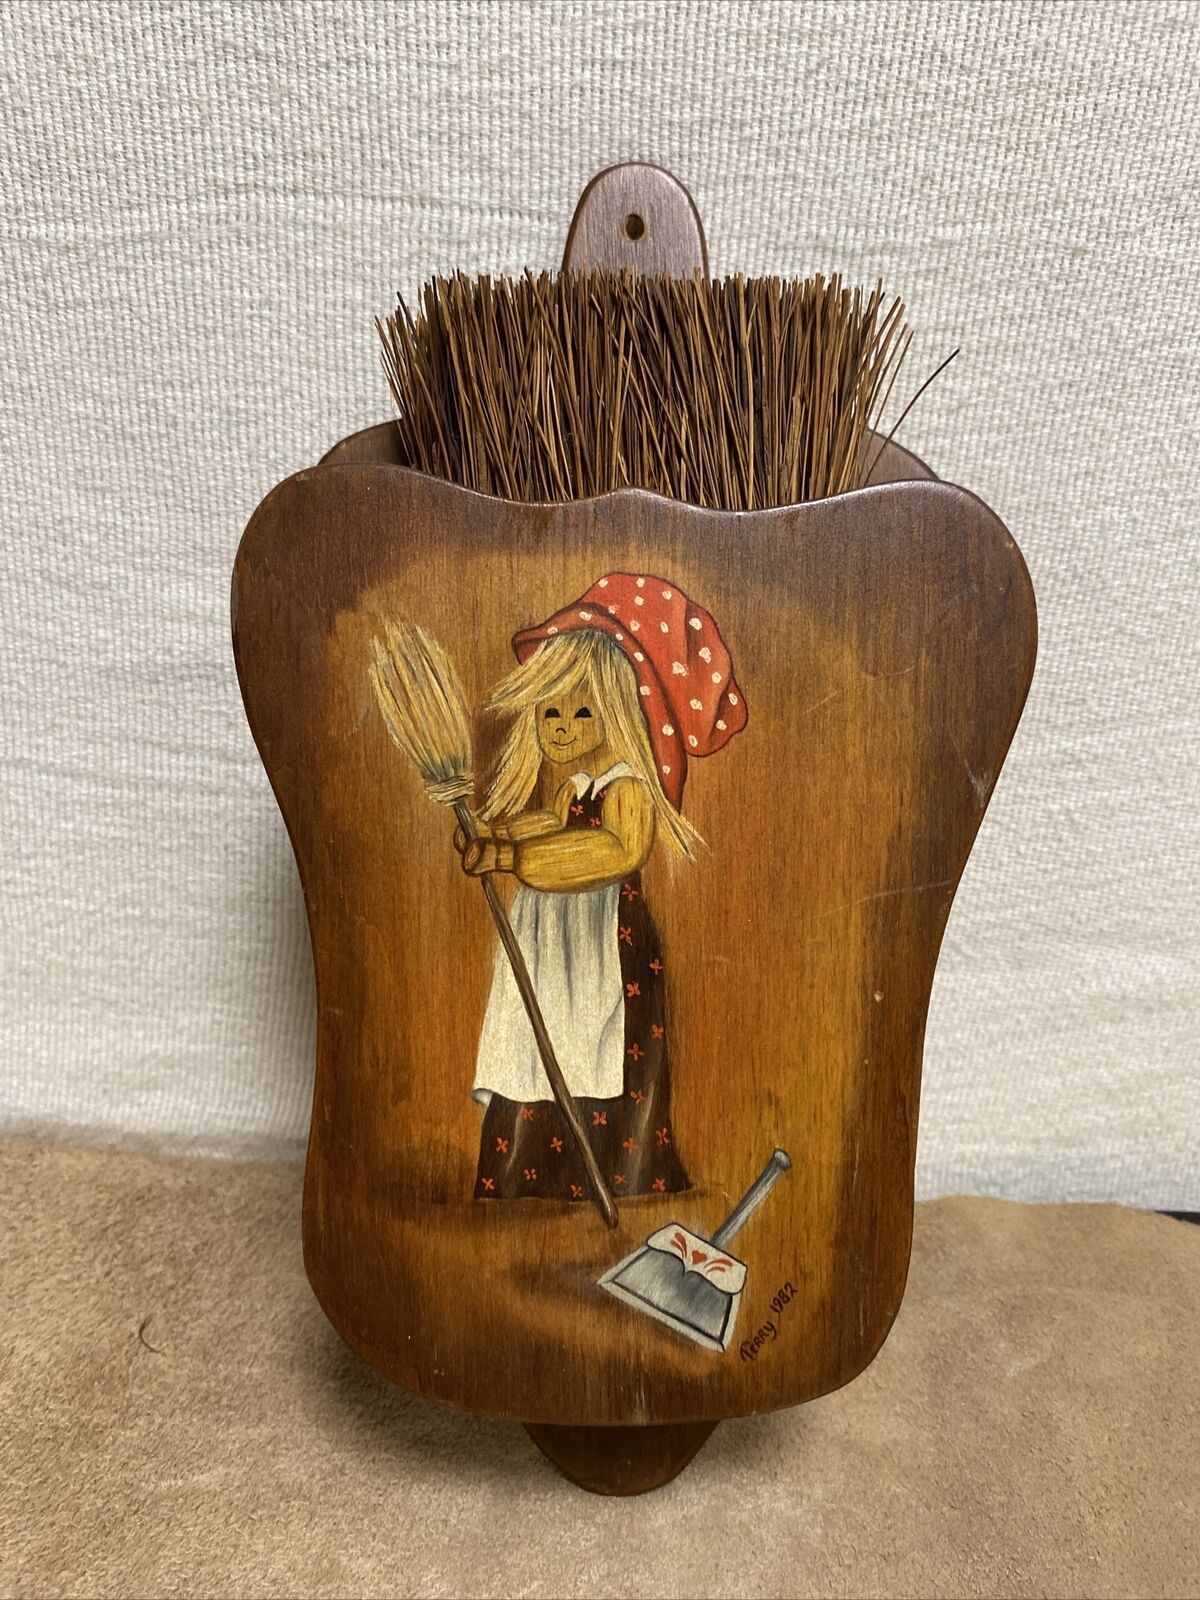 Vintage Straw Whisk Hand Broom - Metal Ring With Wood Wall Holder Hand Painted